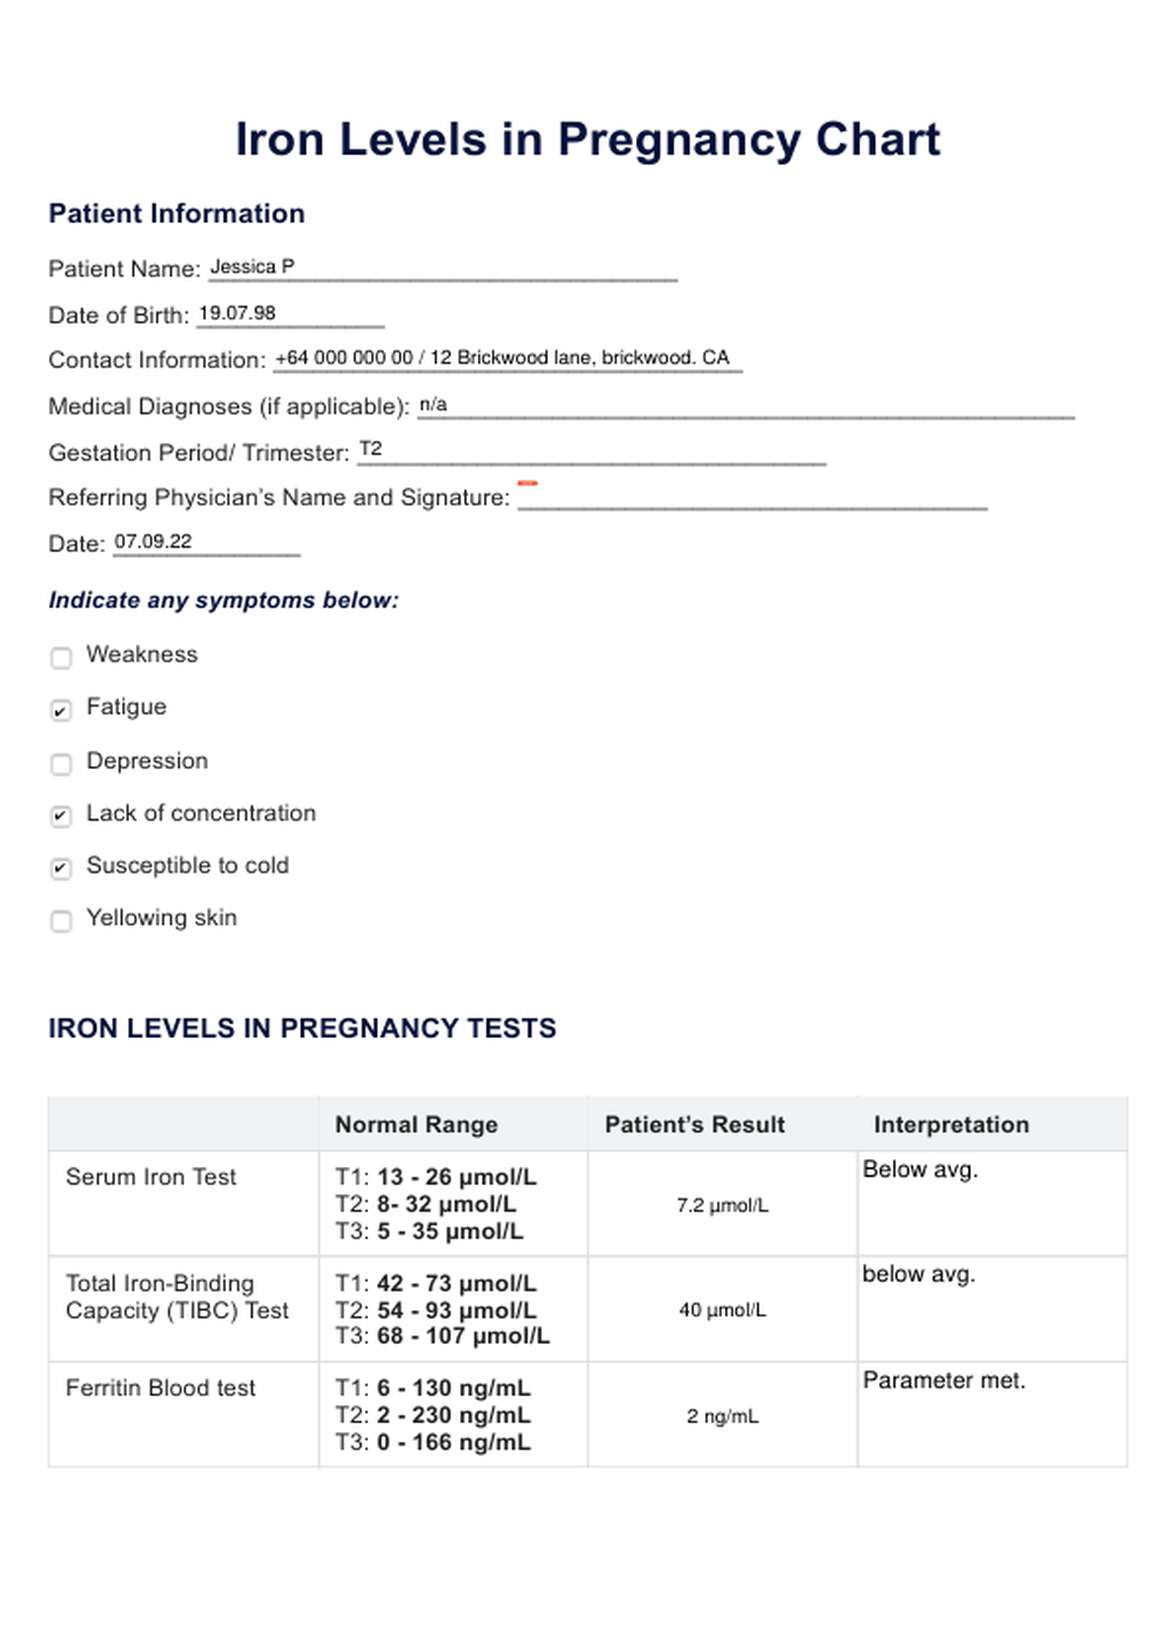 Iron Levels In Pregnancy PDF Example